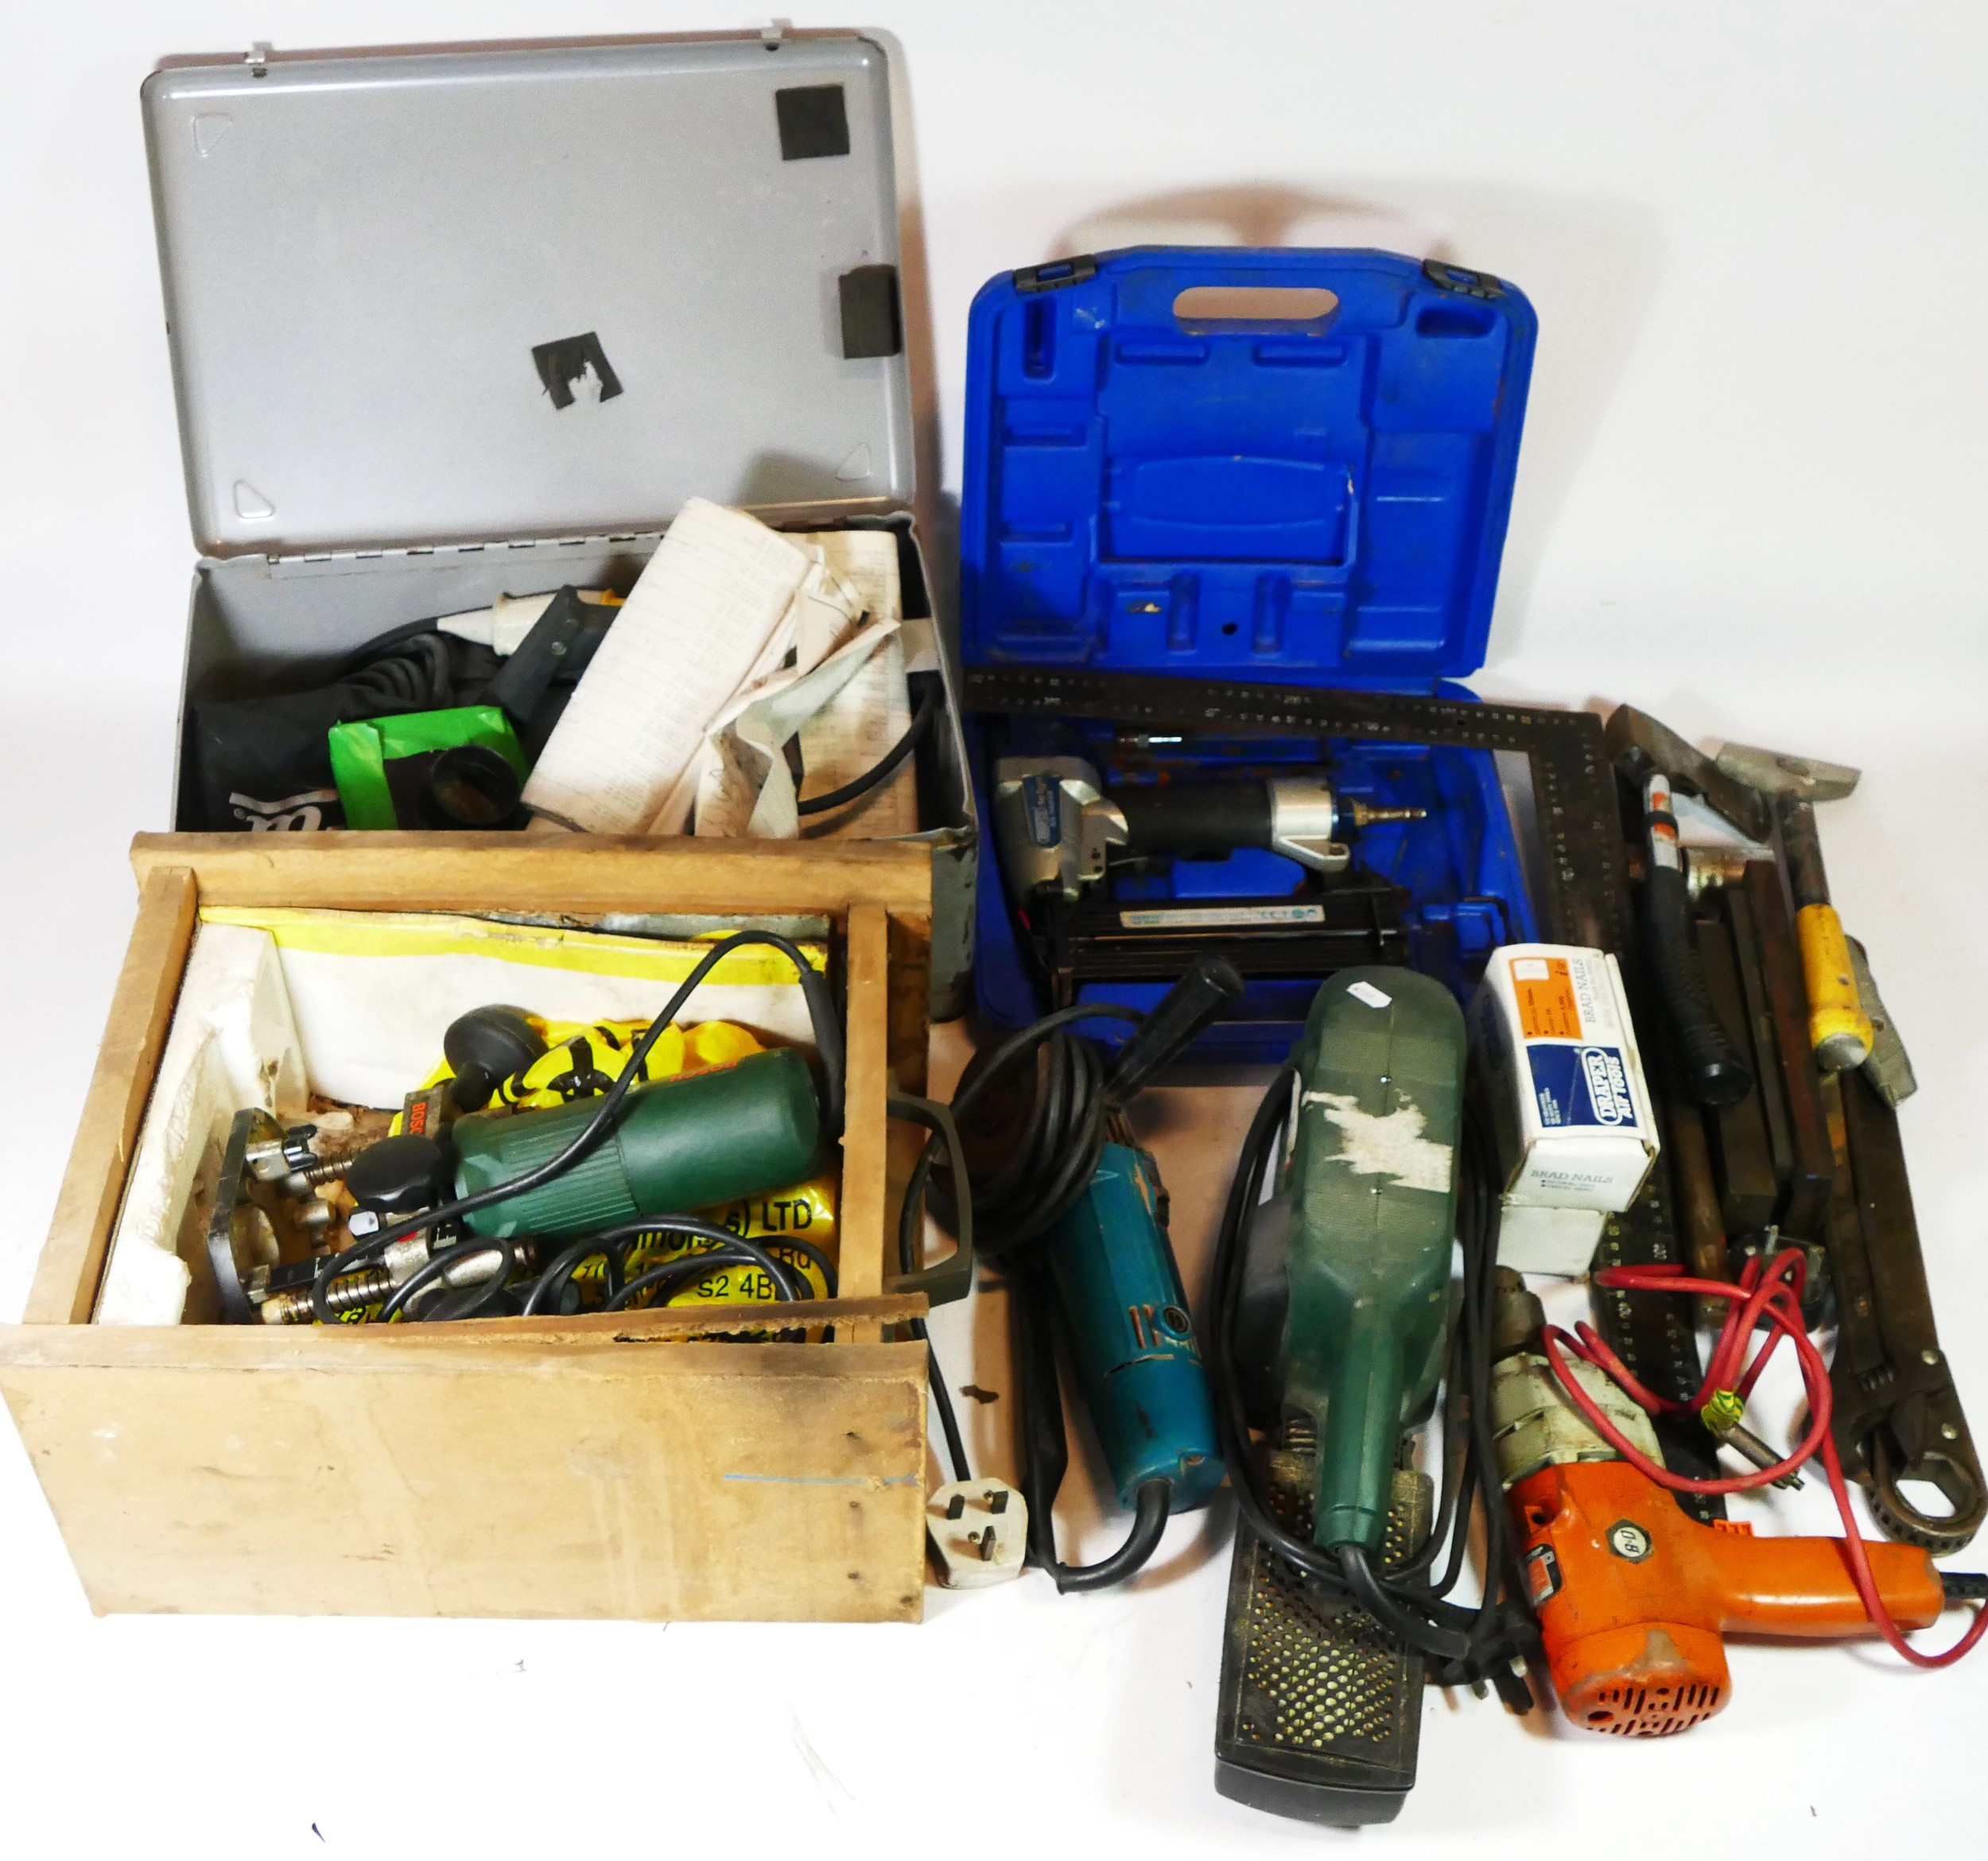 A collection of power tools and hand tools to include a Bosch sander, a grinder, a Elu planer, a